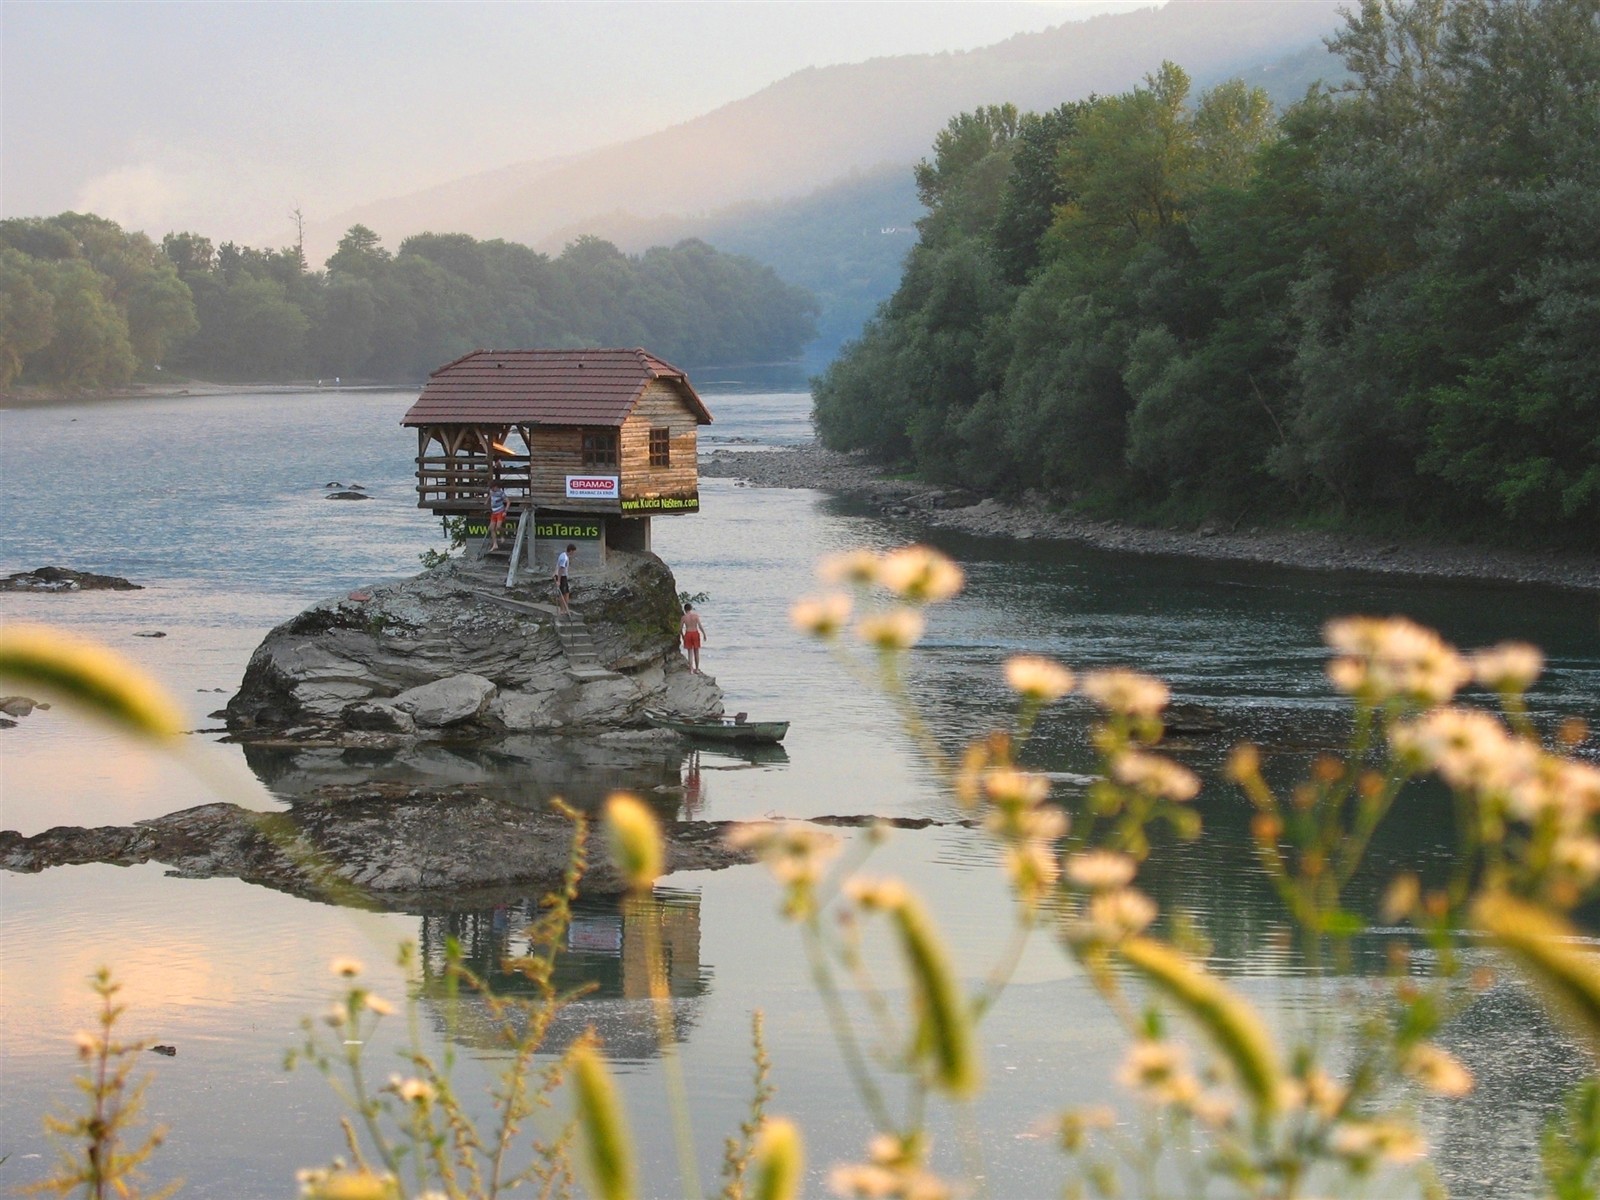 http://amazing--world.yolasite.com/resources/House%20in%20the%20middle%20of%20the%20Drina%20River.jpg